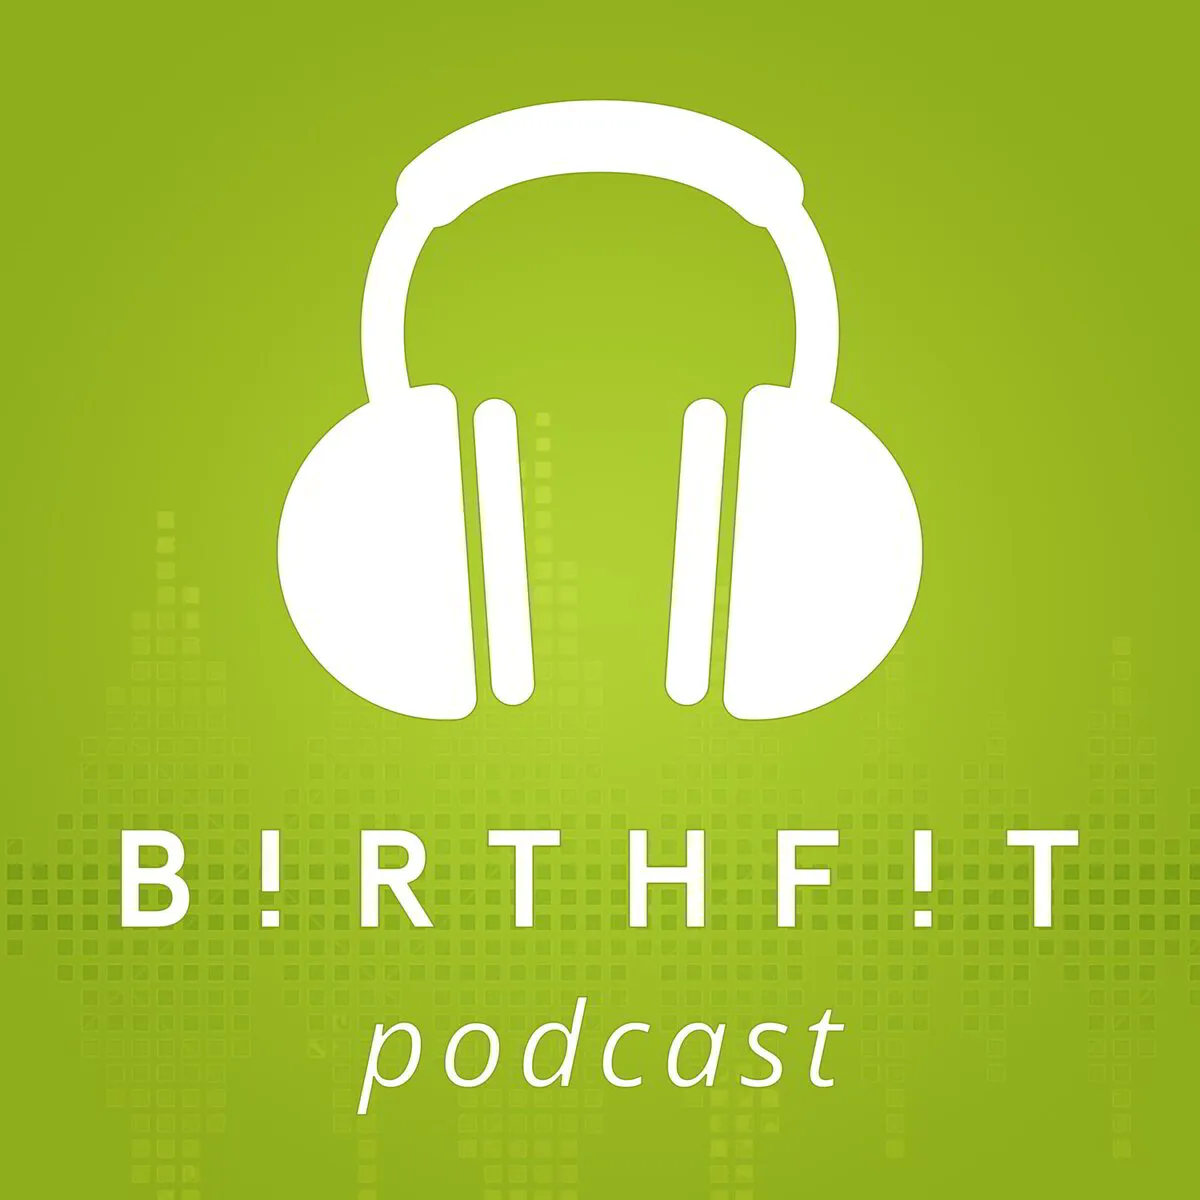 BIRTHFIT Podcast 121 Featuring Tracie Enis of National Black Doulas Association